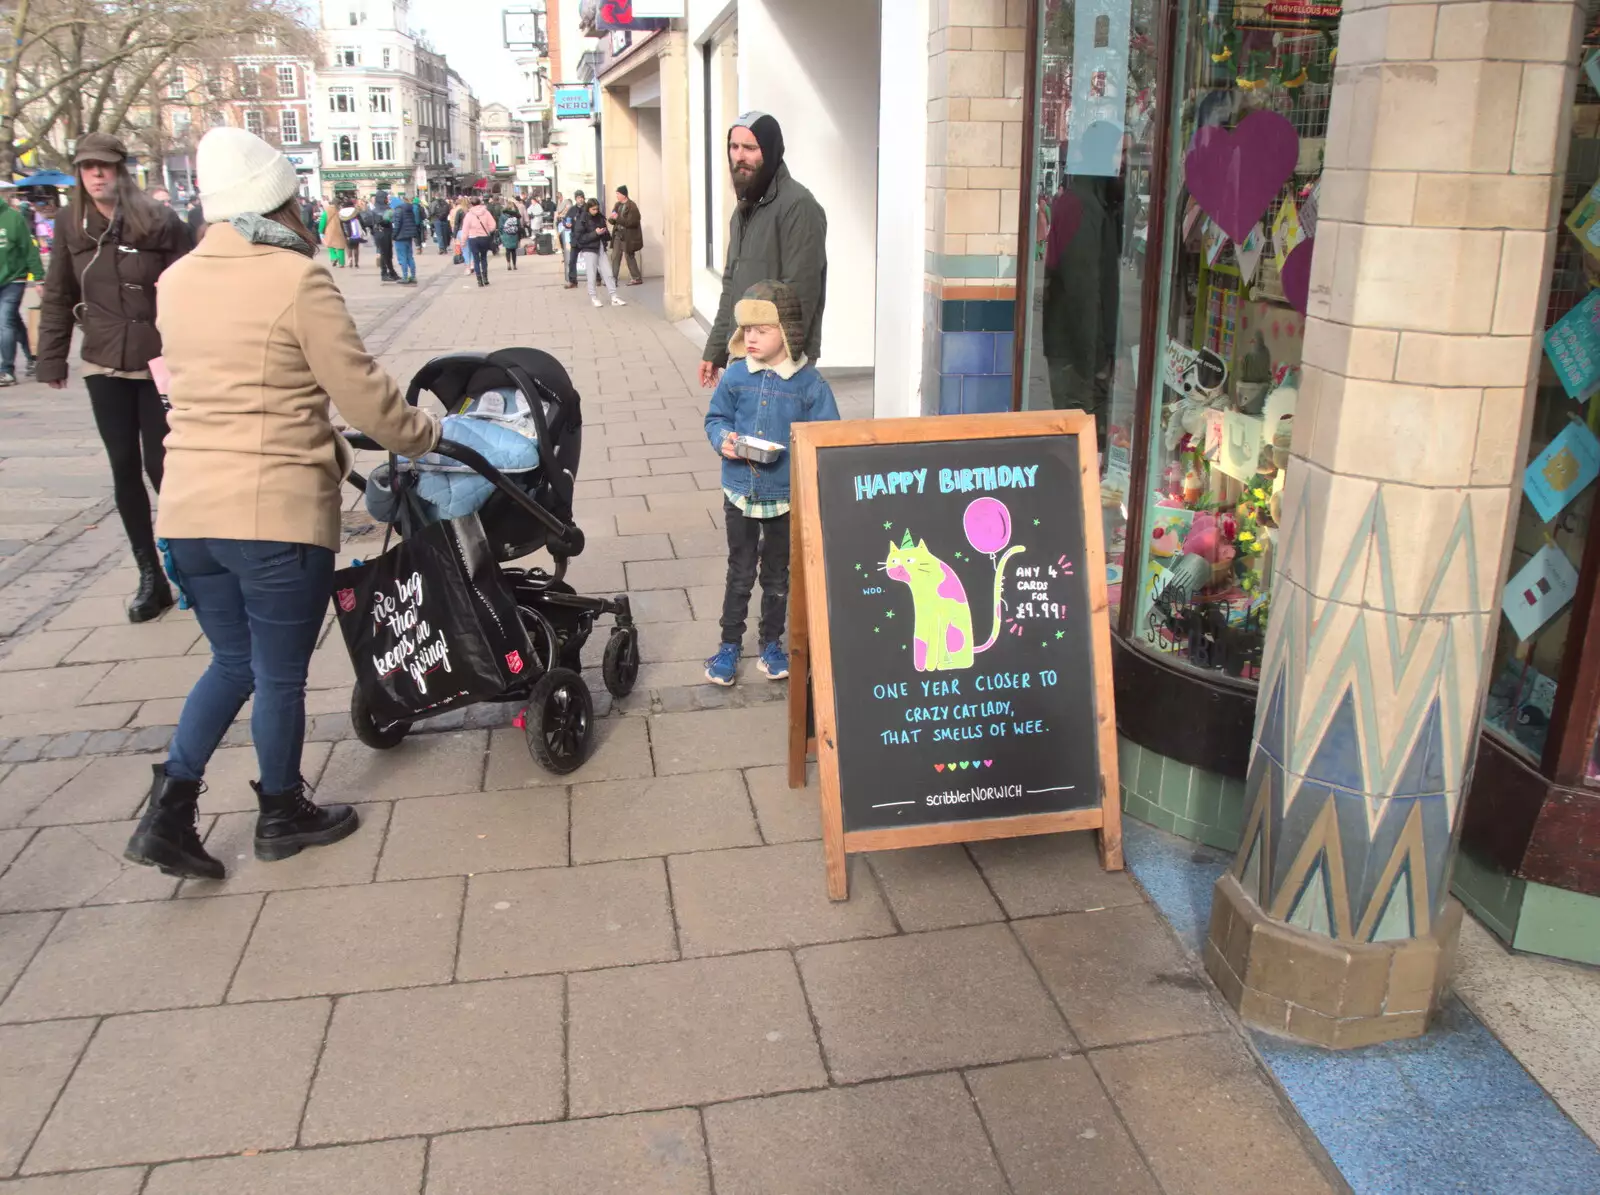 An amusing shop sign on Gentleman's Walk, from We Are Detectorists, and a Trip to the Market, Norwich - 25th February 2023